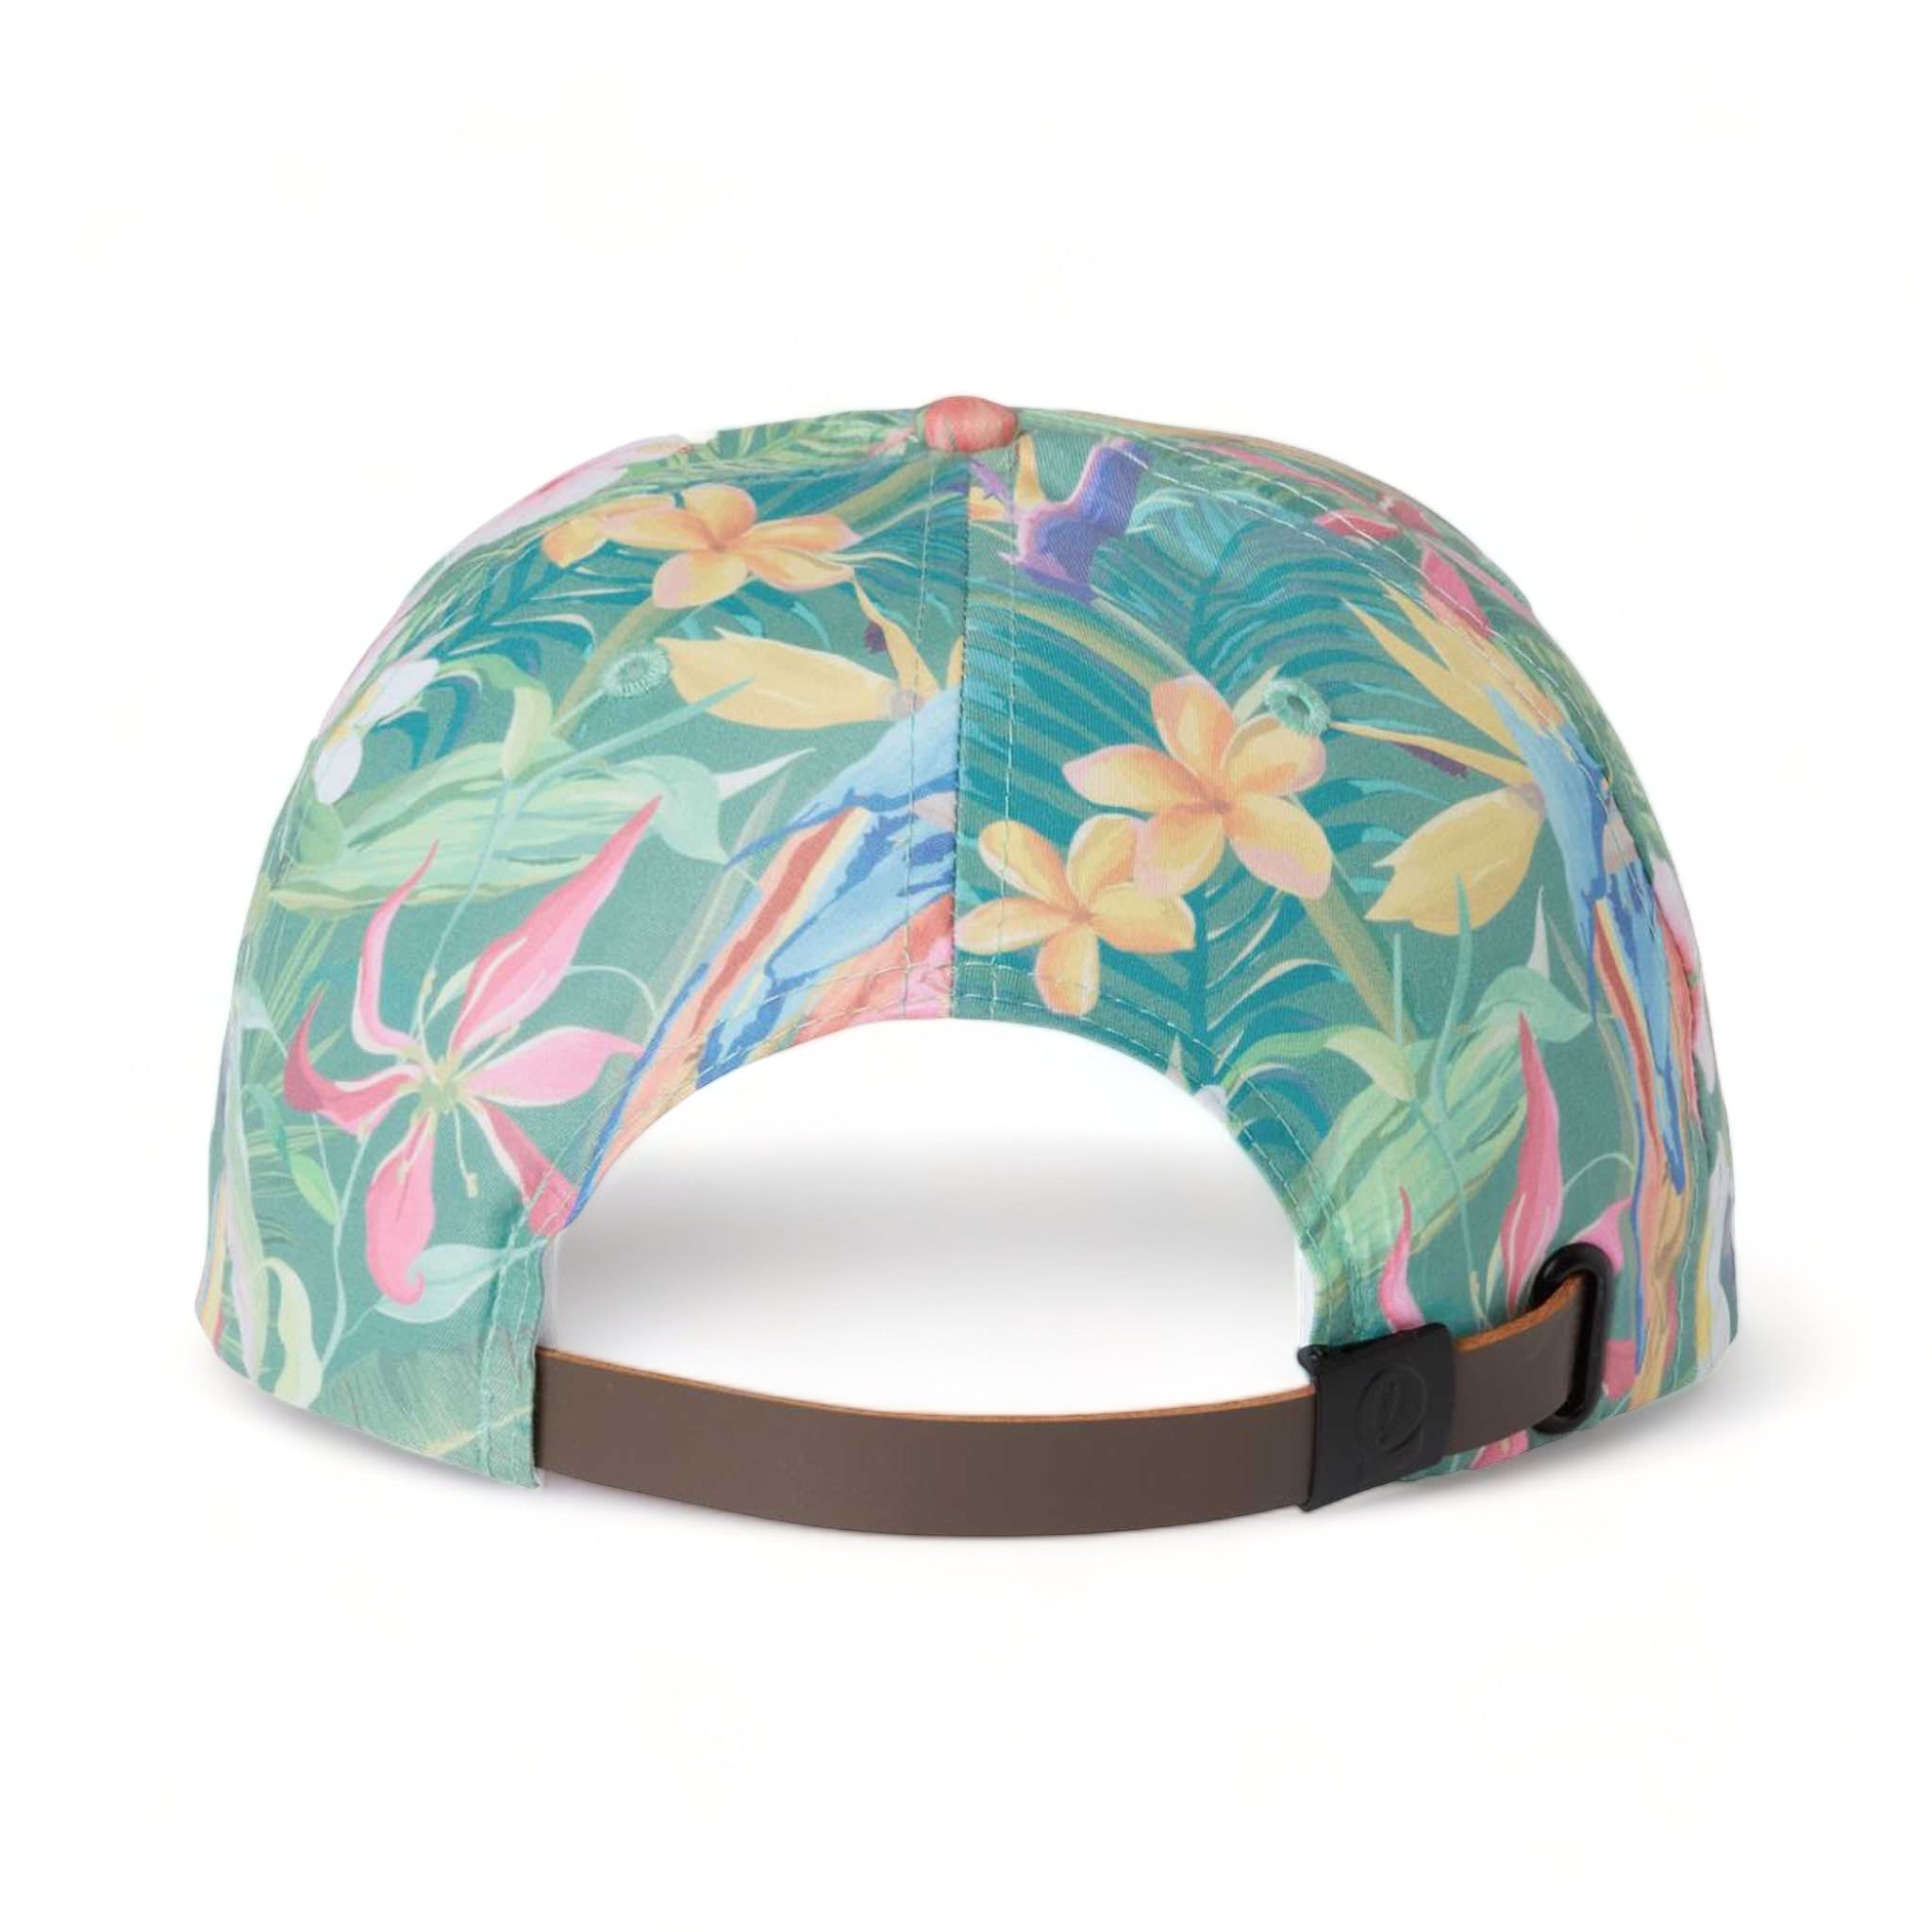 Back view of Imperial DNA010 custom hat in hawai'in rainforest